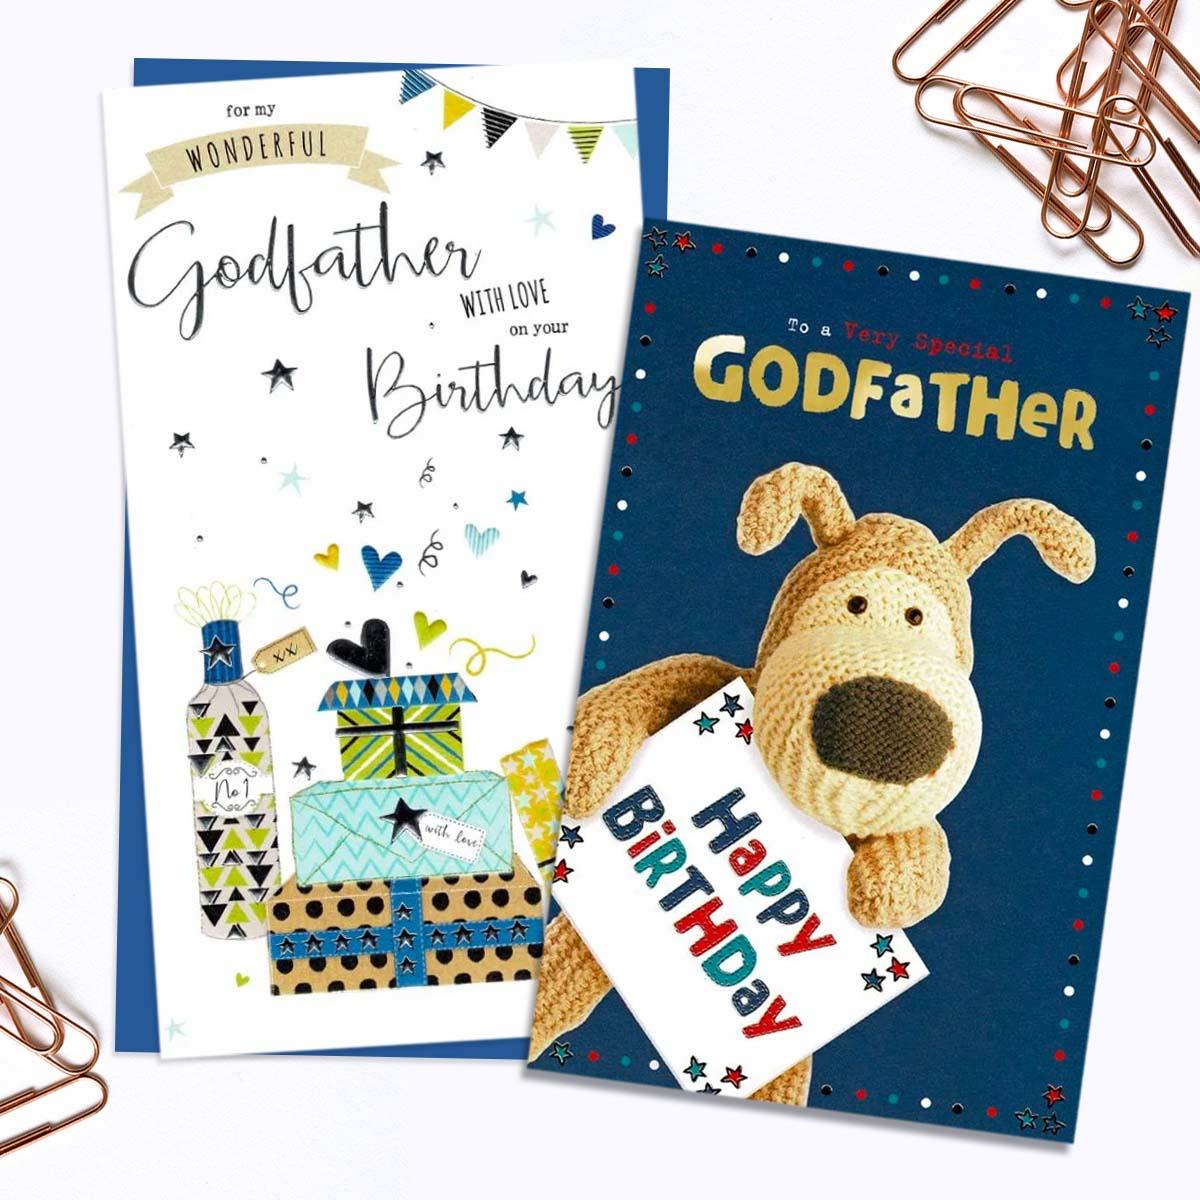 A Selection Of Cards To Show The Depth Of Range In Godfather Birthday Card Section